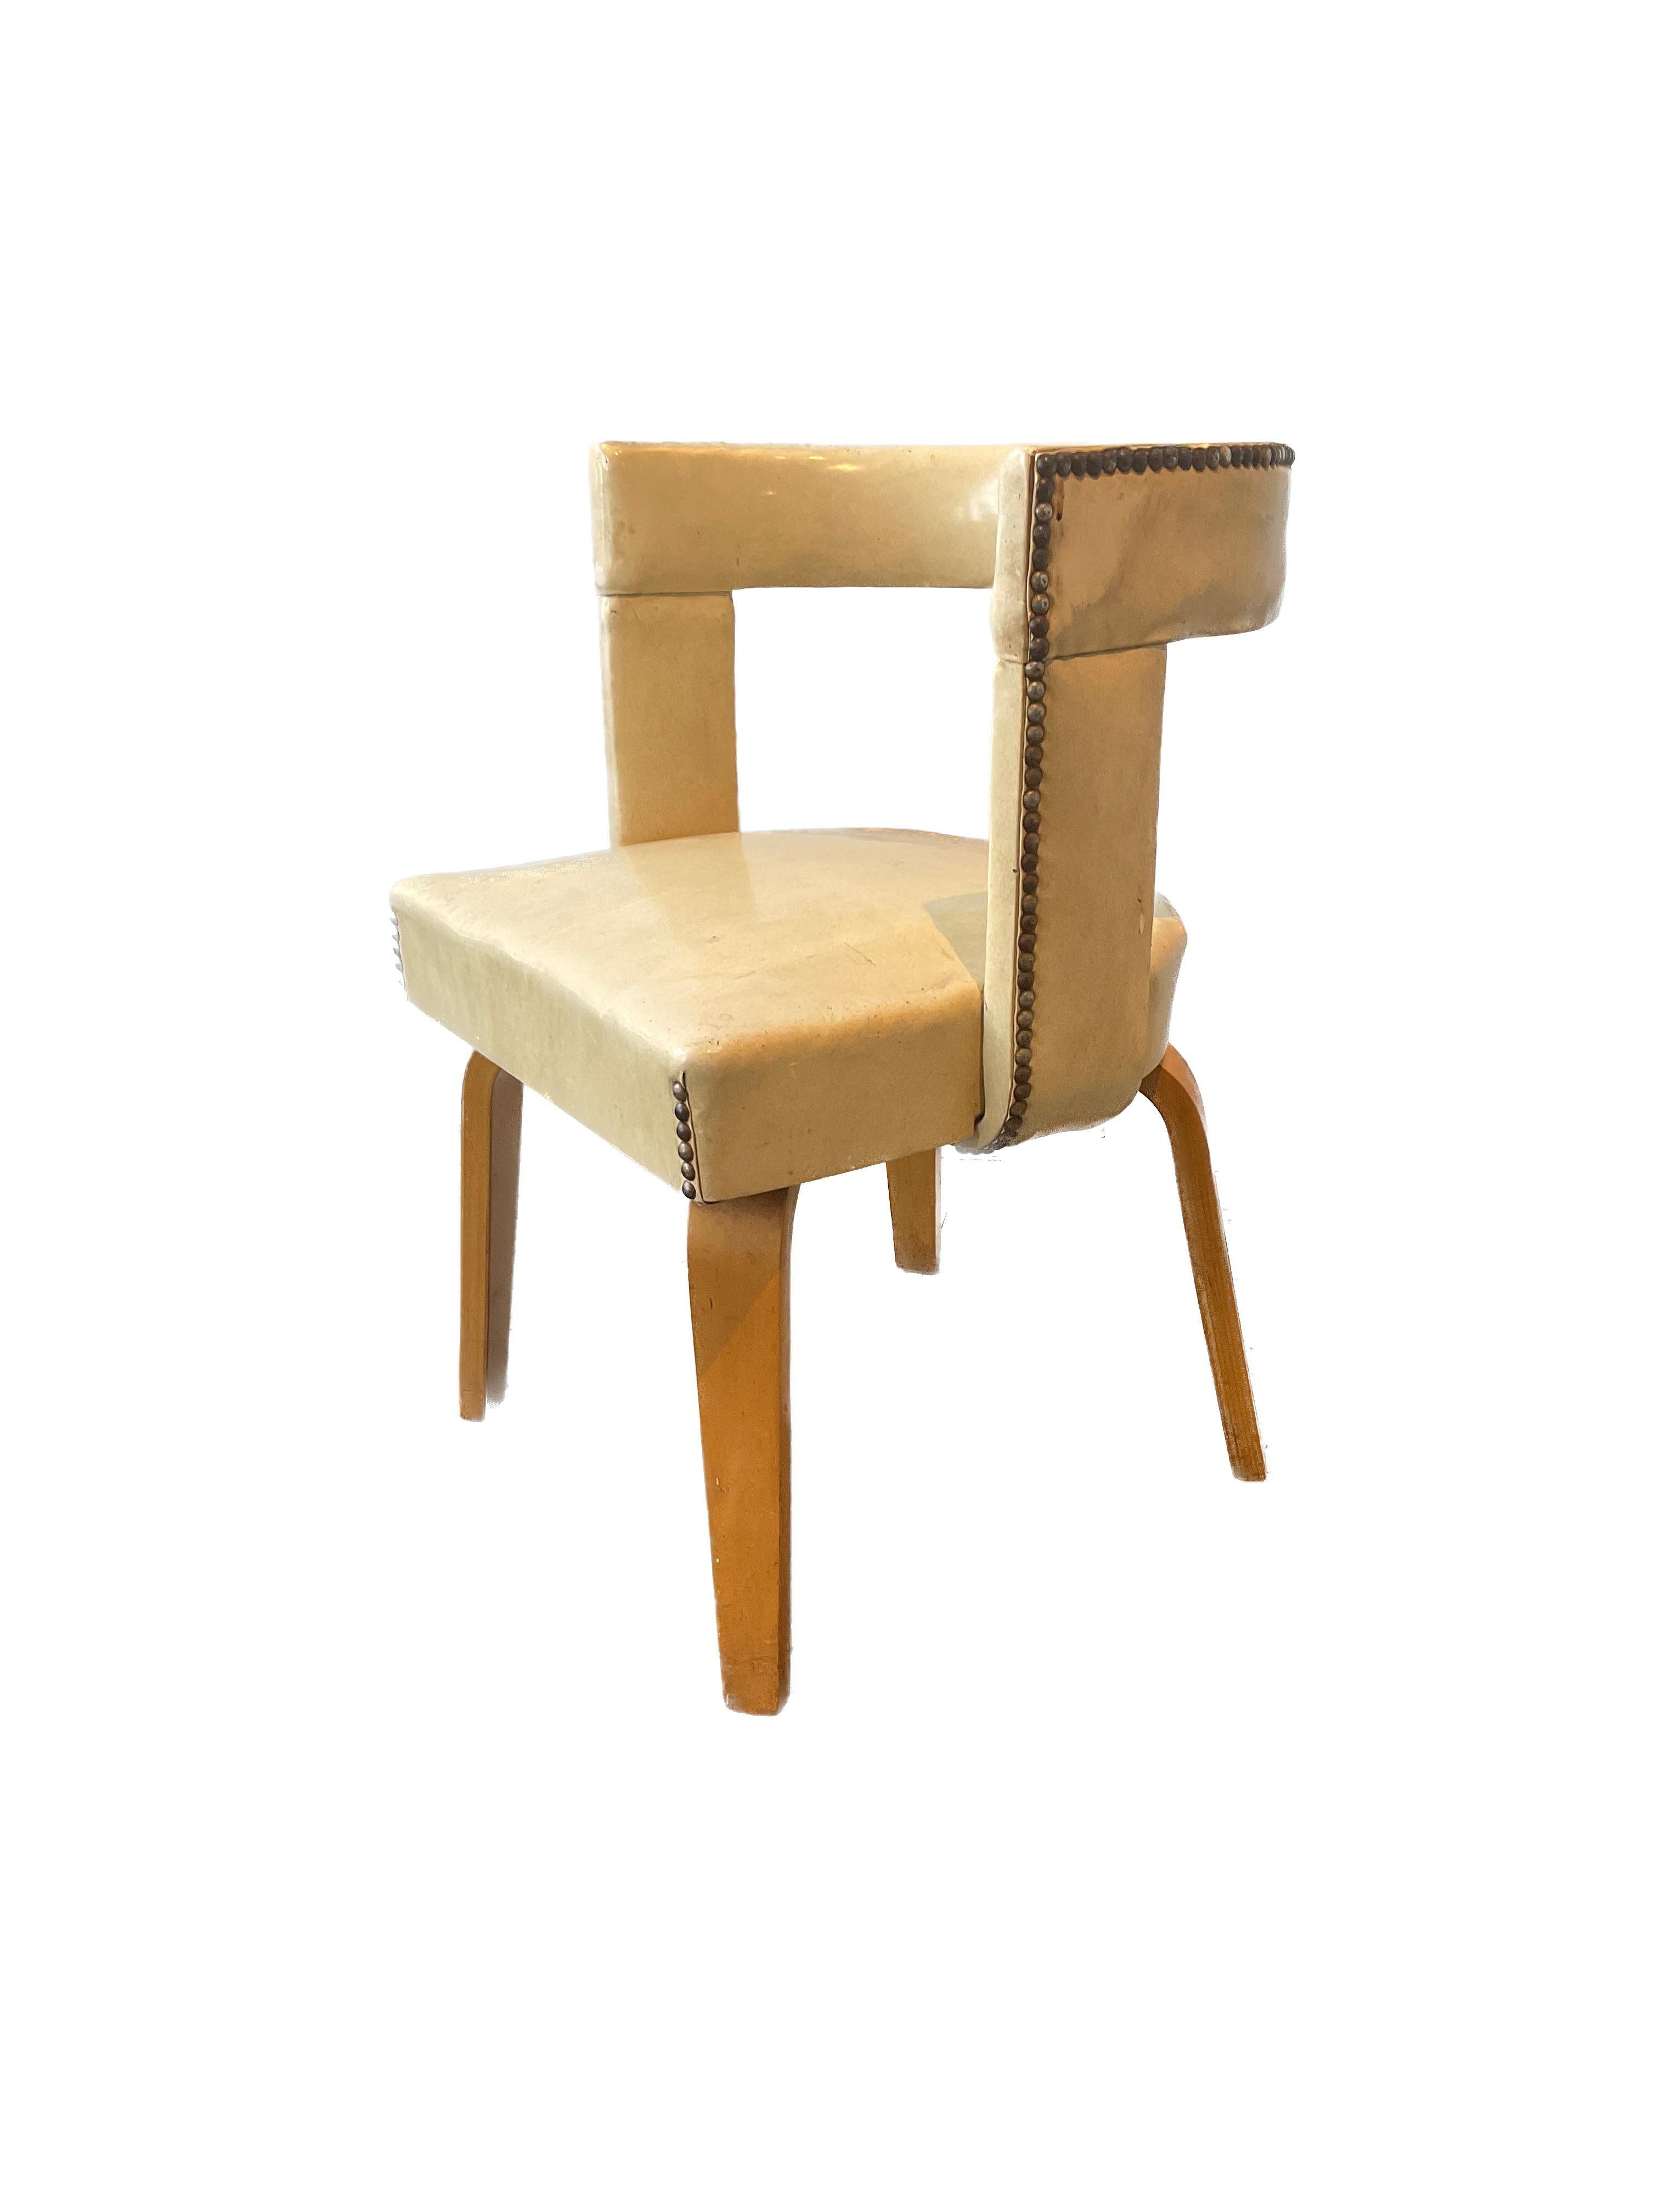 Pair of Architectural Thonet Chairs 4